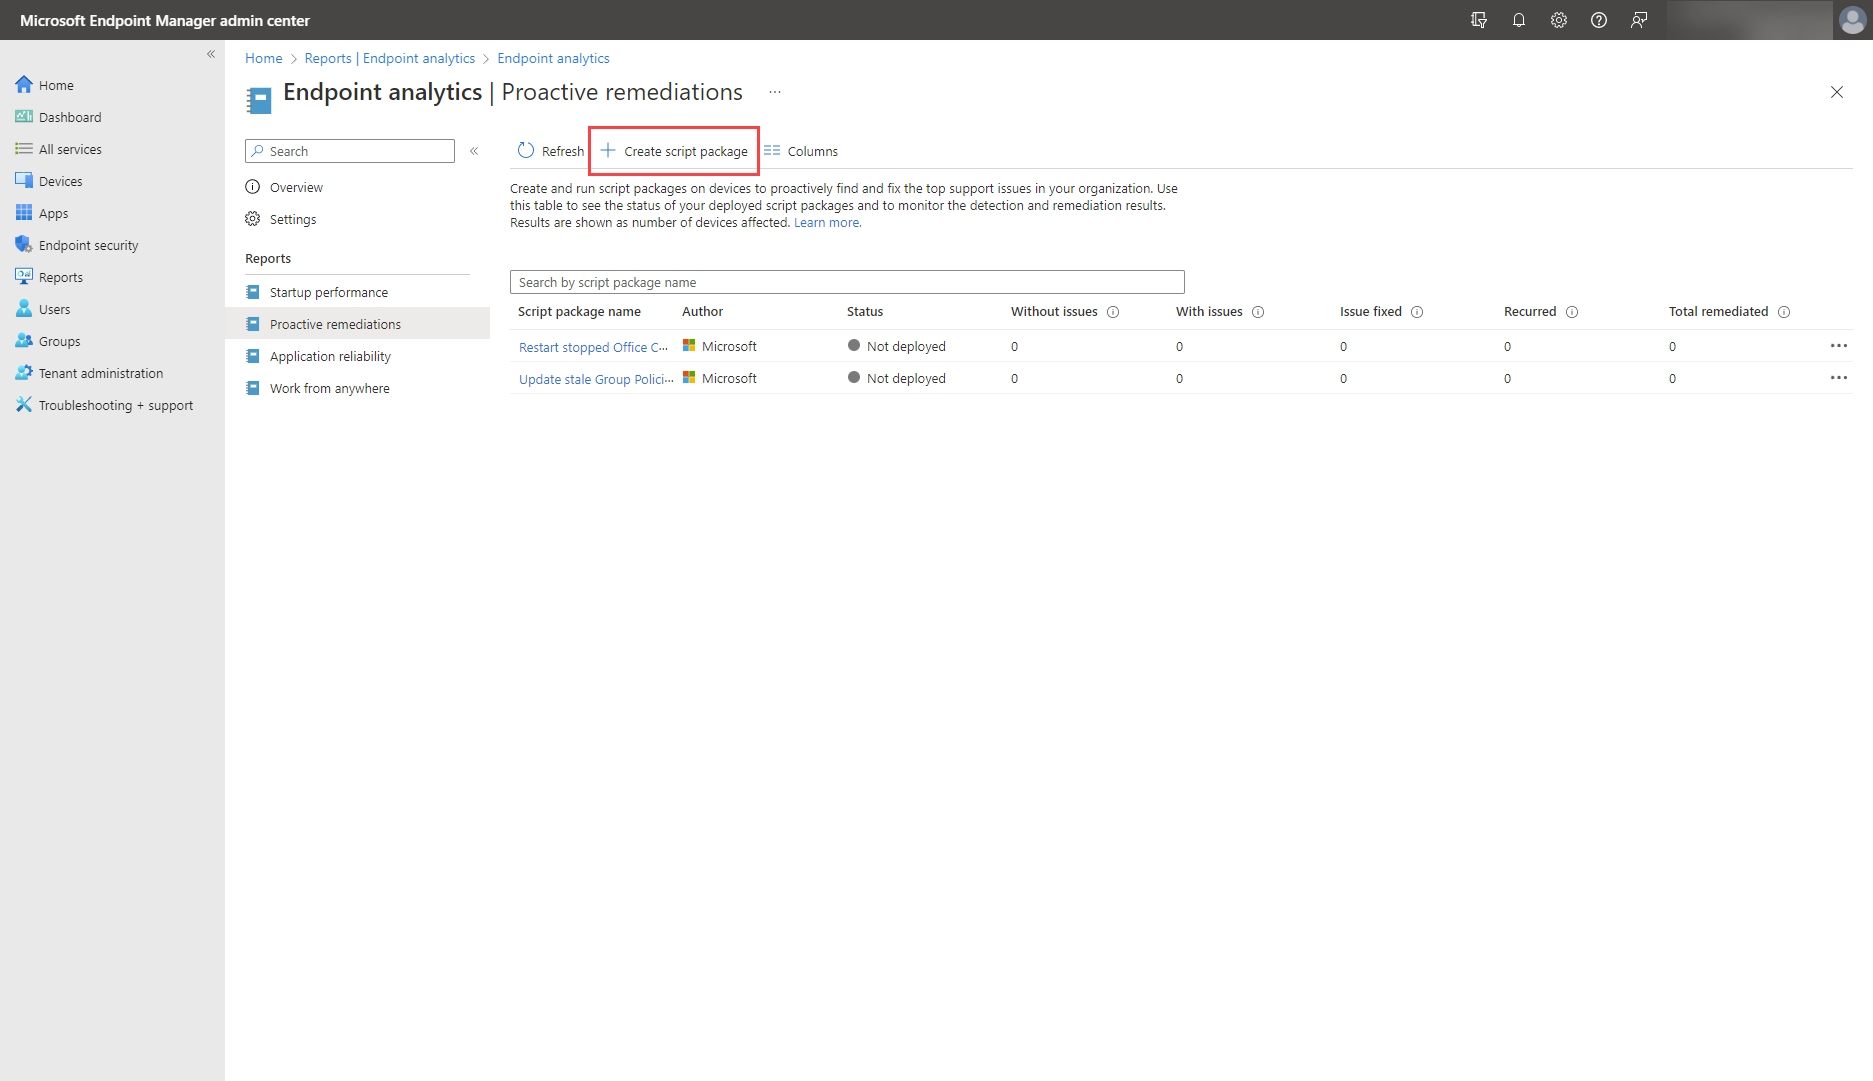 A screenshot of the Endpoint analytics view in Microsoft Intune, focused on where to create a script package.